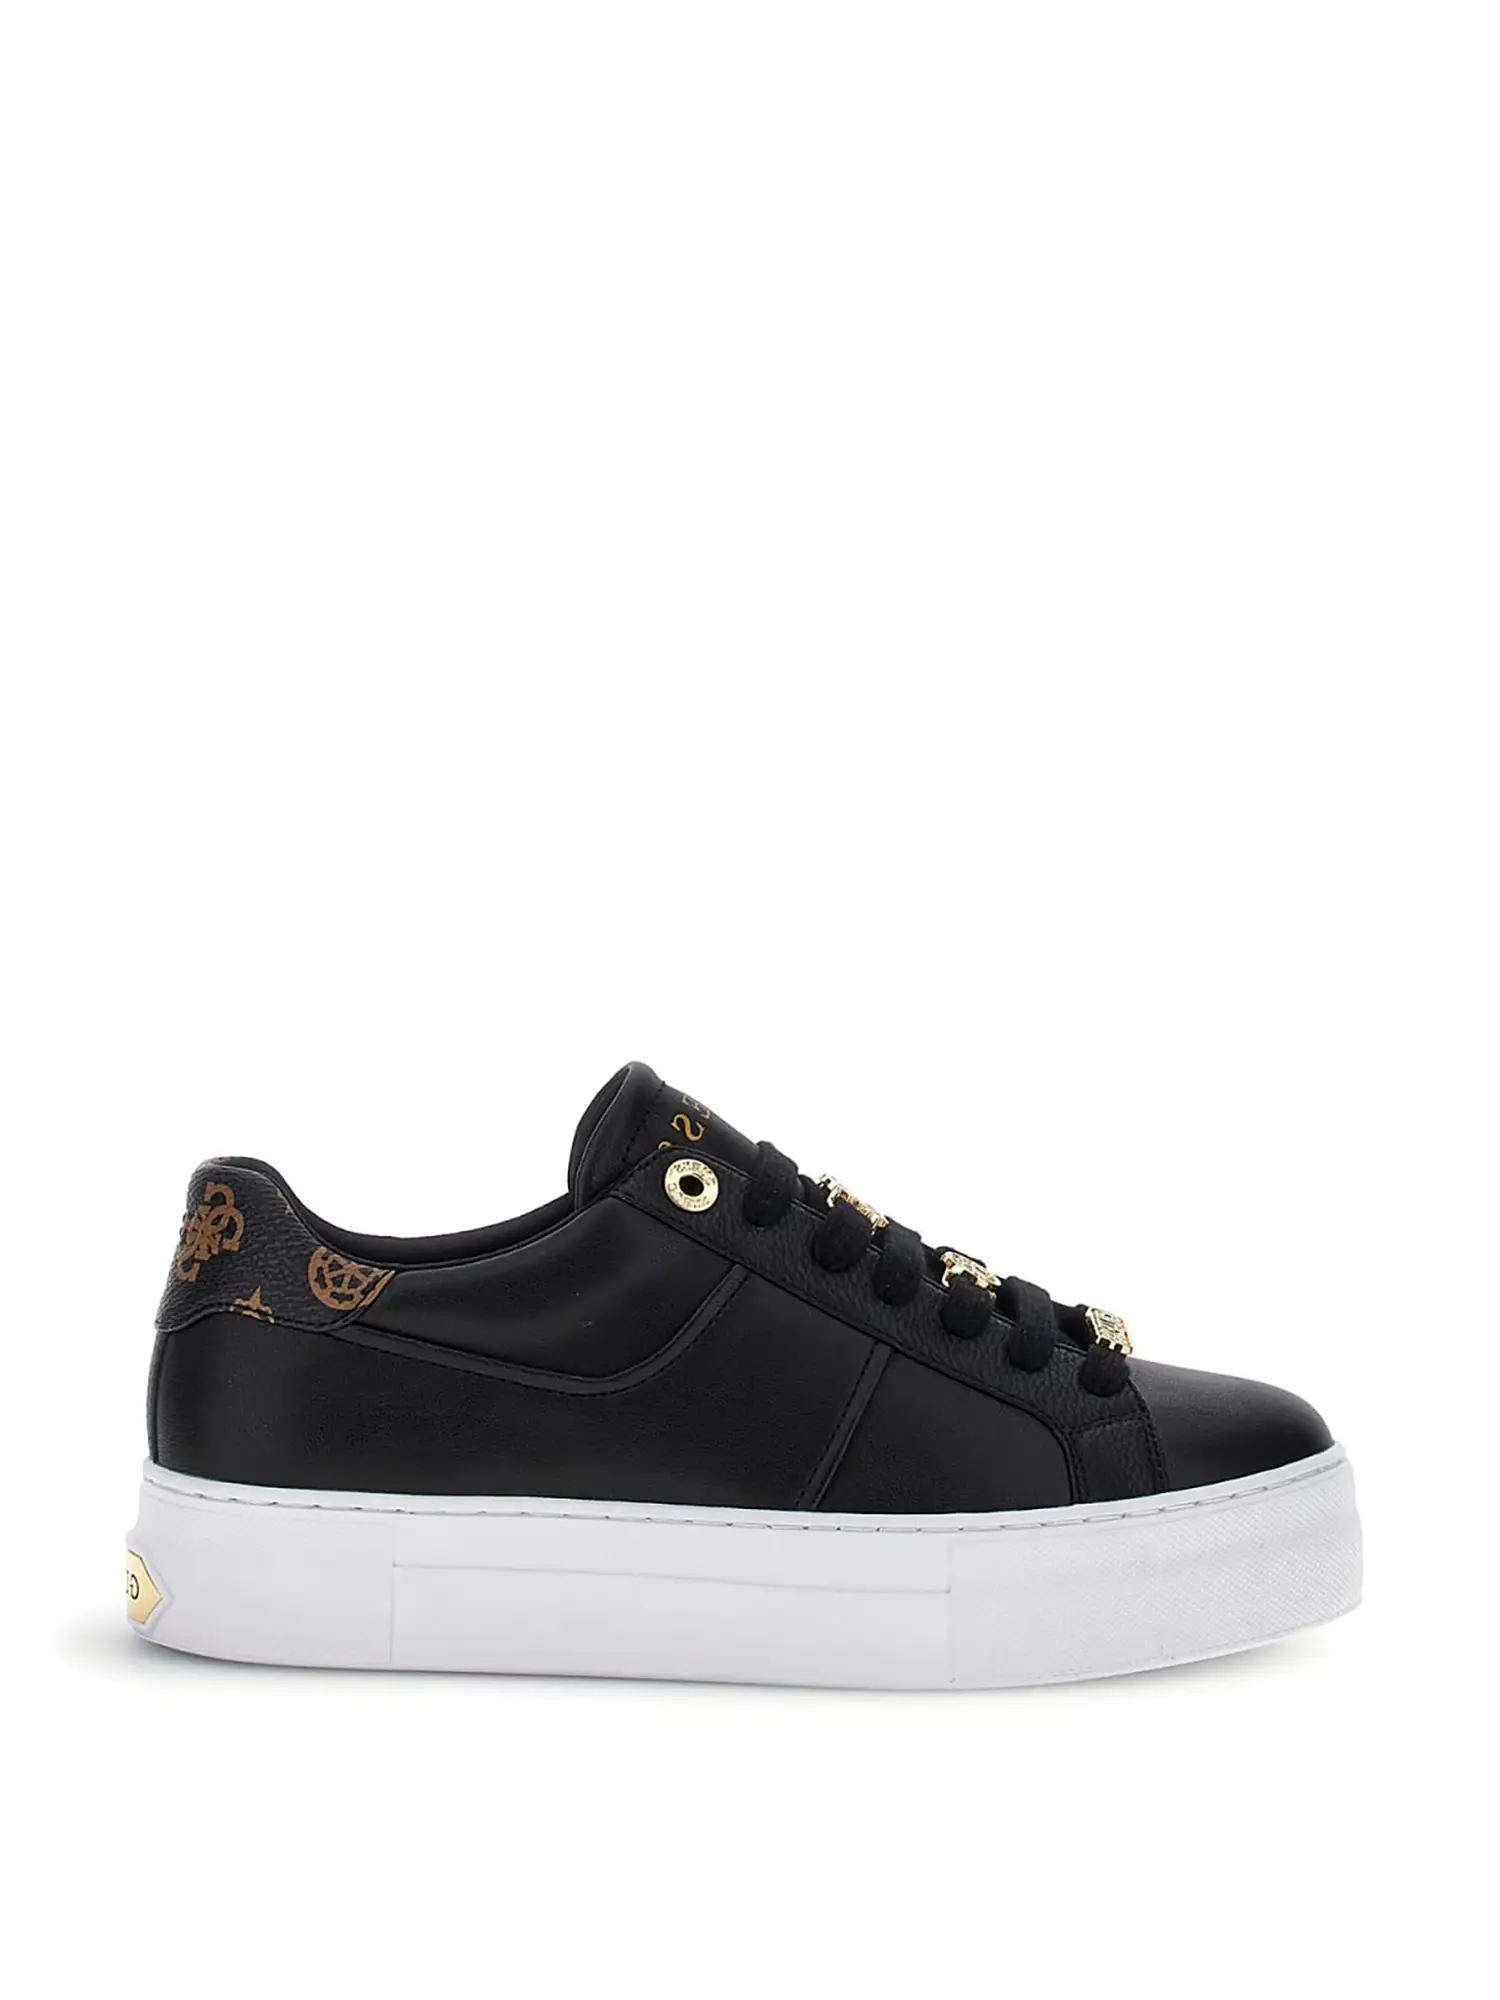 SNEAKERS DONNA - GUESS - FLJGIE ELE12 - NERO, 37